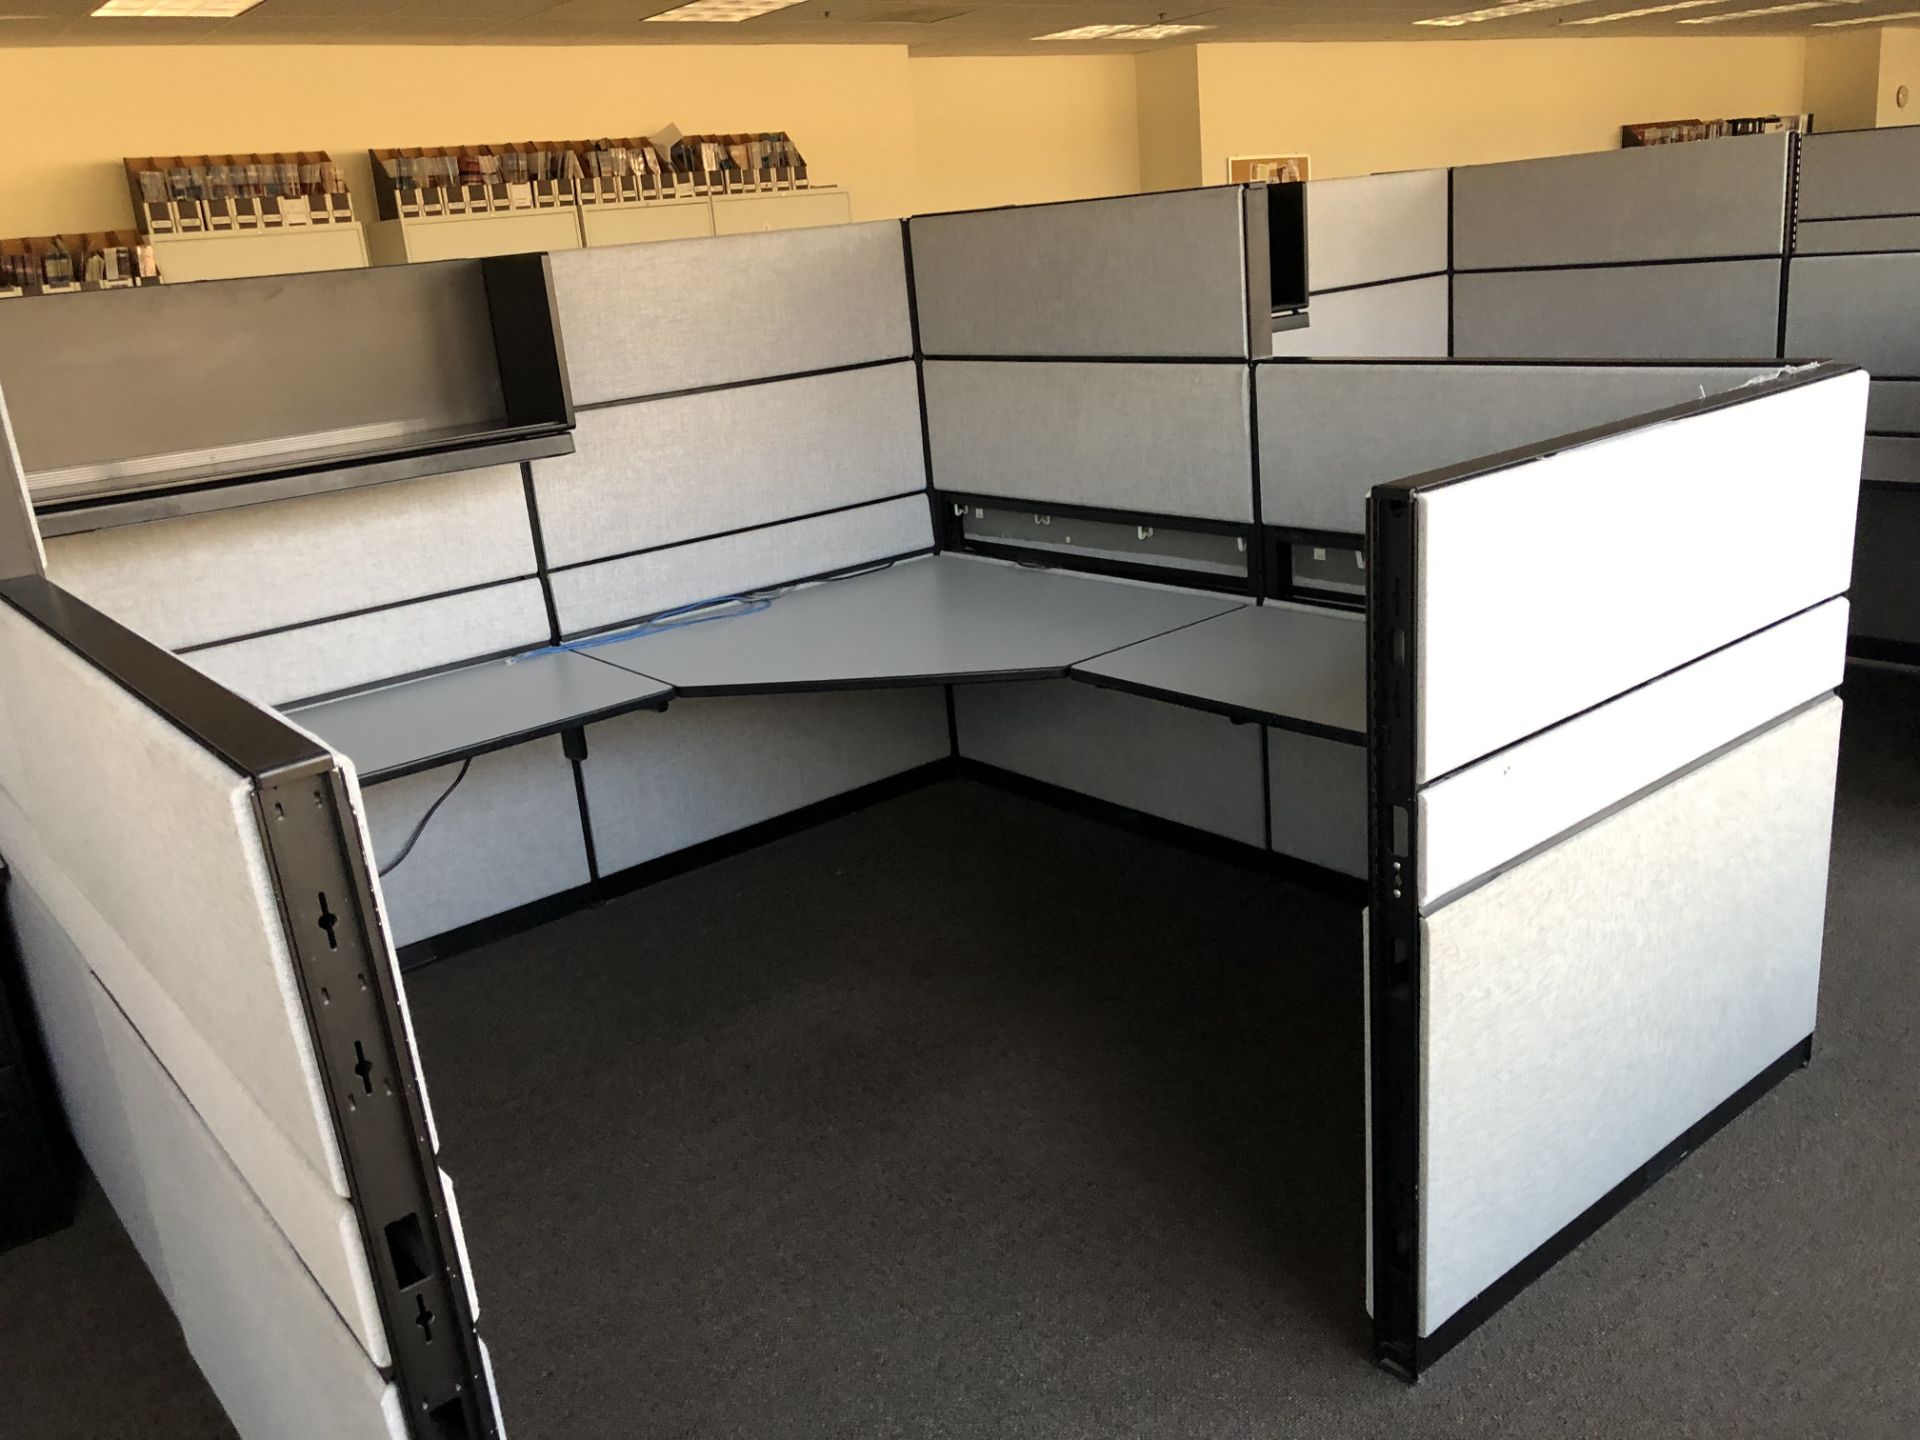 (8) Teknion Approx. 8' x 8' Cubicle Upholstered Partition Workstations with Surfaces, Drawers &